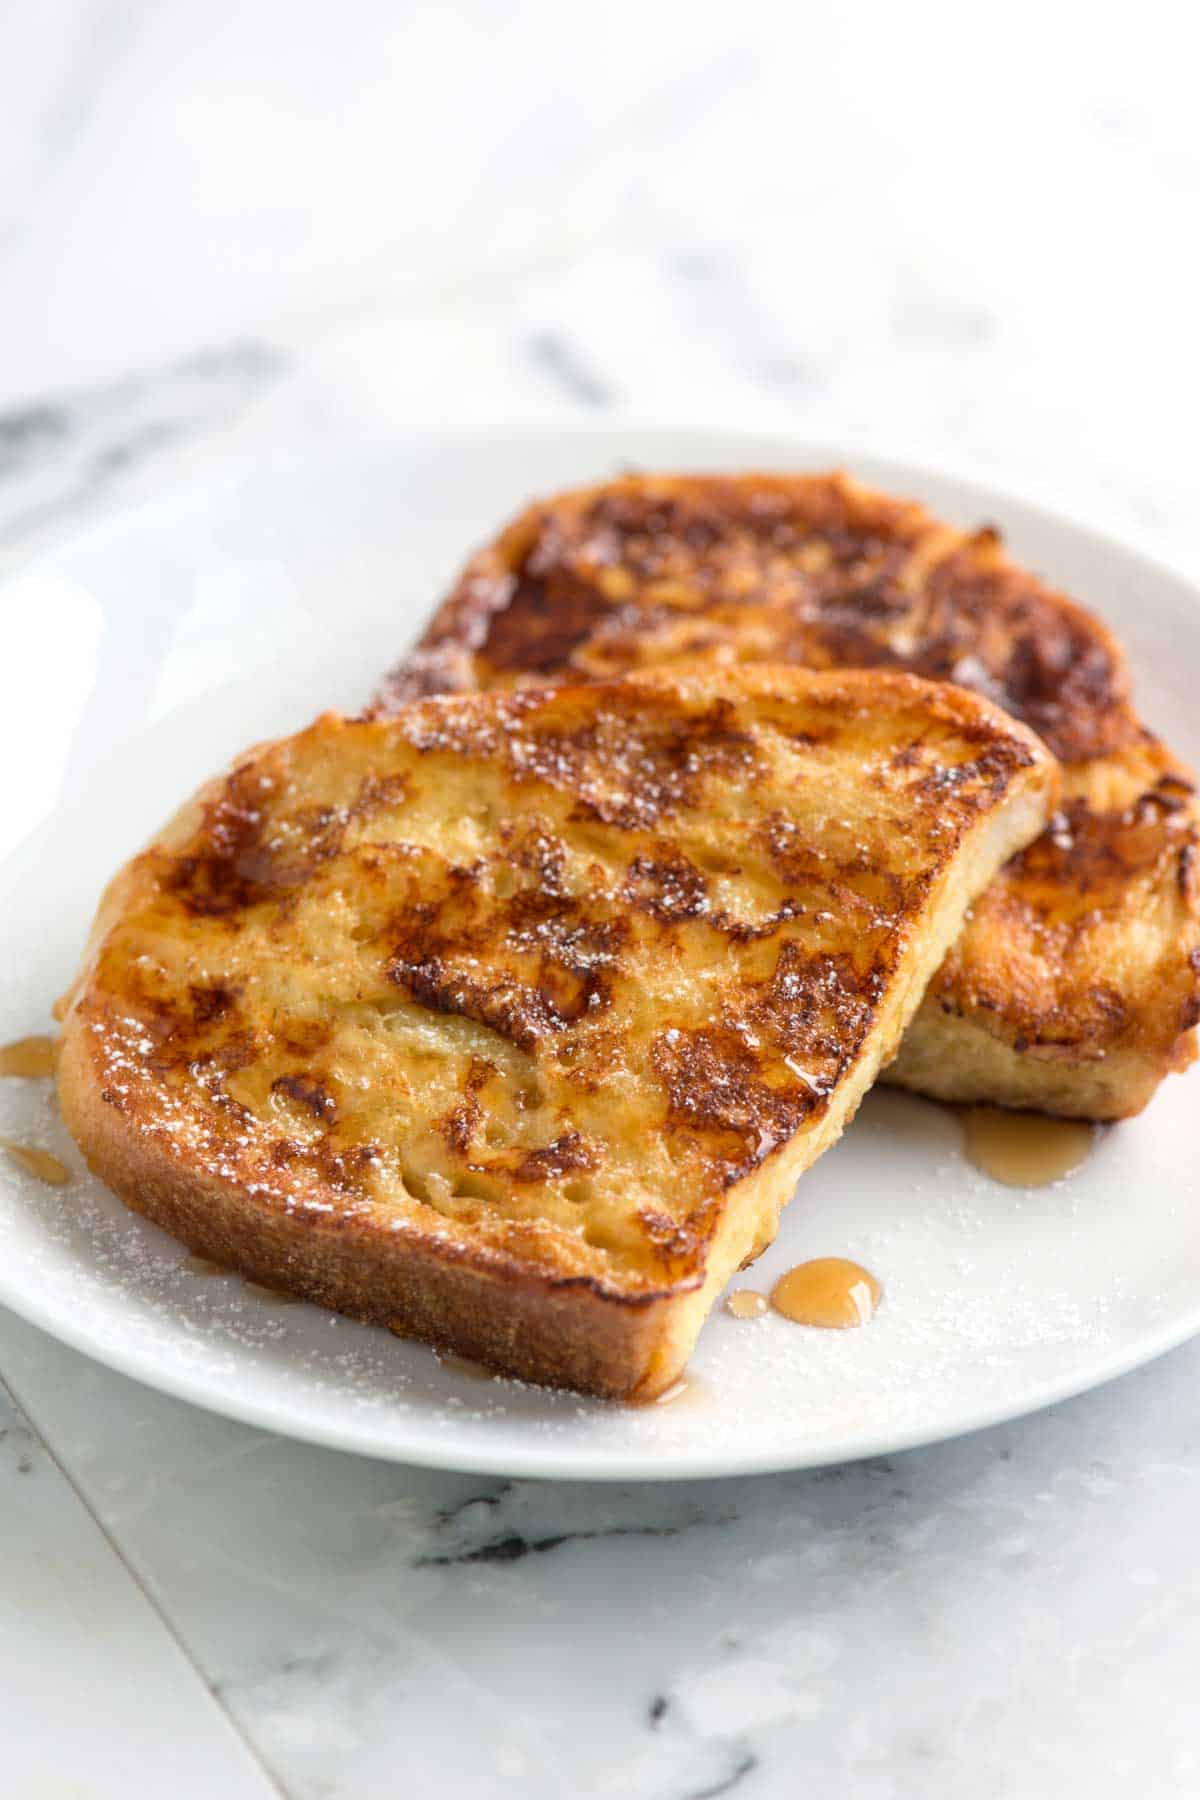 10+ French toast bread recipe from scratch image ideas – Wallpaper